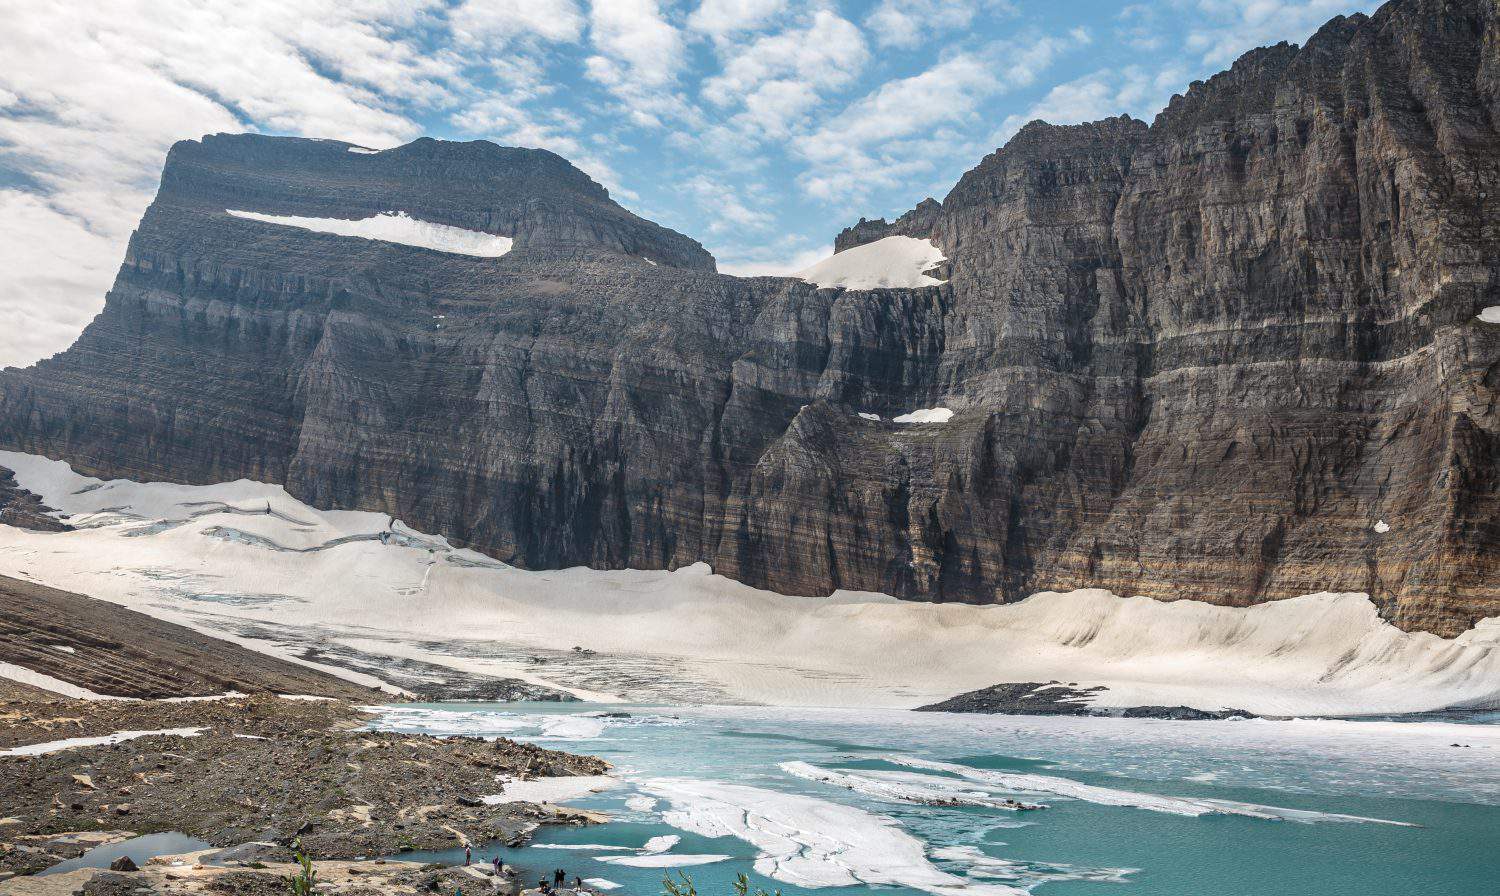 <ul> <li><strong>Location:</strong> Montana</li> <li><strong>Known For:</strong> Beautiful glaciers, trails, valleys, and lakes</li> </ul> <p>The views one takes in while at Montana's Glacier National Park are spectacular. When the Glacier National Park was created in 1910, there was an estimate of around 80 glaciers. Now, <a href="https://www.nps.gov/glac/learn/nature/glaciersoverview.htm">there are only 26 glaciers left</a>, and they are melting fast. Annual mean temperatures have been rising since 1910. While some predict that the glaciers may disappear as soon as 2030, it's also possible that <a href="https://www.nps.gov/glac/learn/nature/glaciersoverview.htm">they will stick around longer</a>.</p>